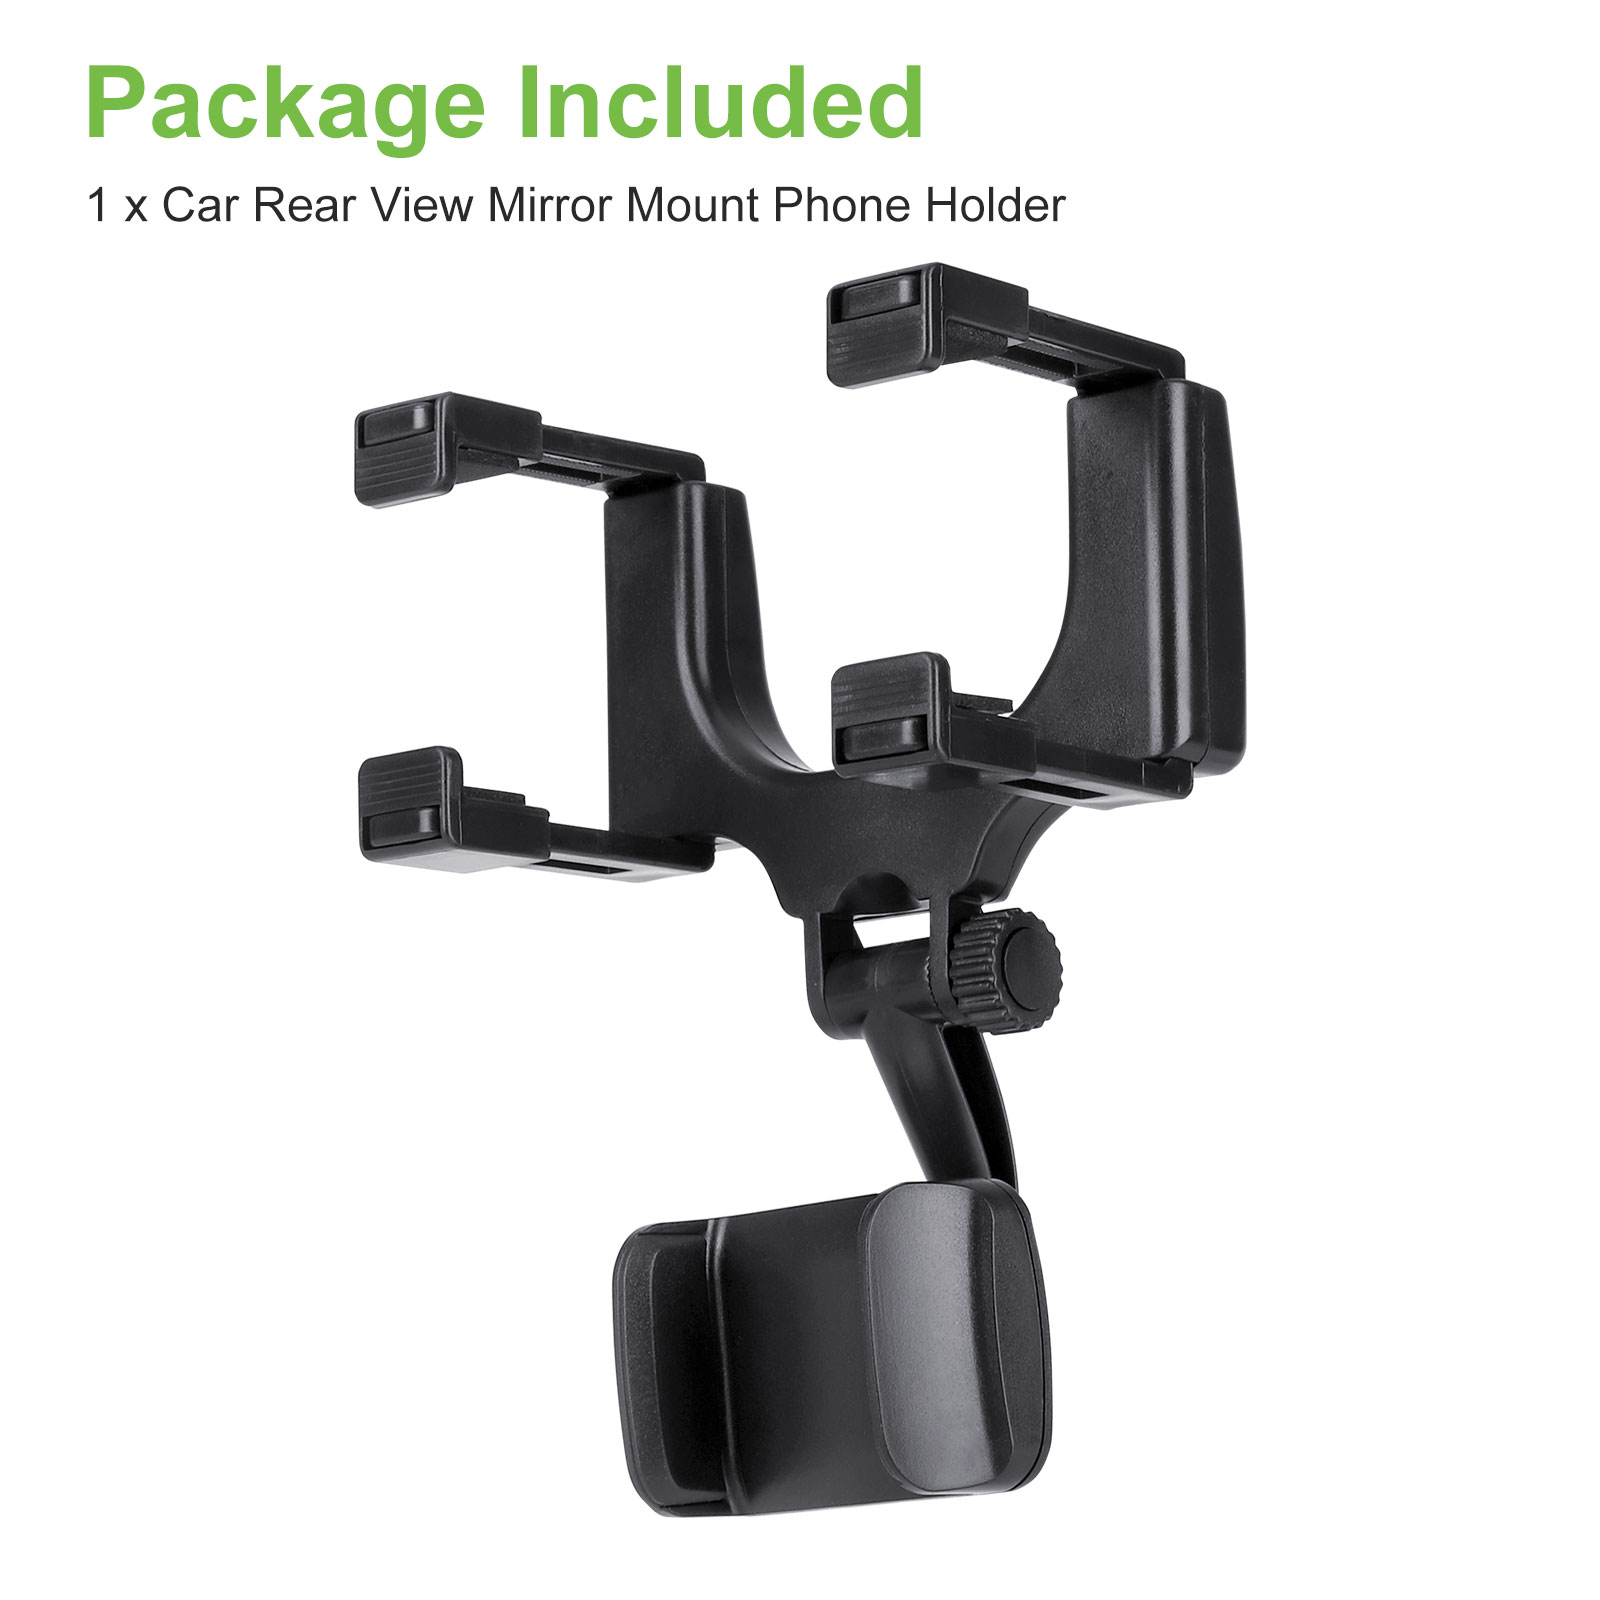 TSV Car Rear View Mirror Mount Grip Clip, 240 Rotation Car Mount Holder, Universal Smartphone Holders Cell Phone Mount Fit for iPhone 13/12/11 Pro Xr Xs Max X, Samsung S21/Galaxy, HTC, GPS, Smartphone - image 9 of 9